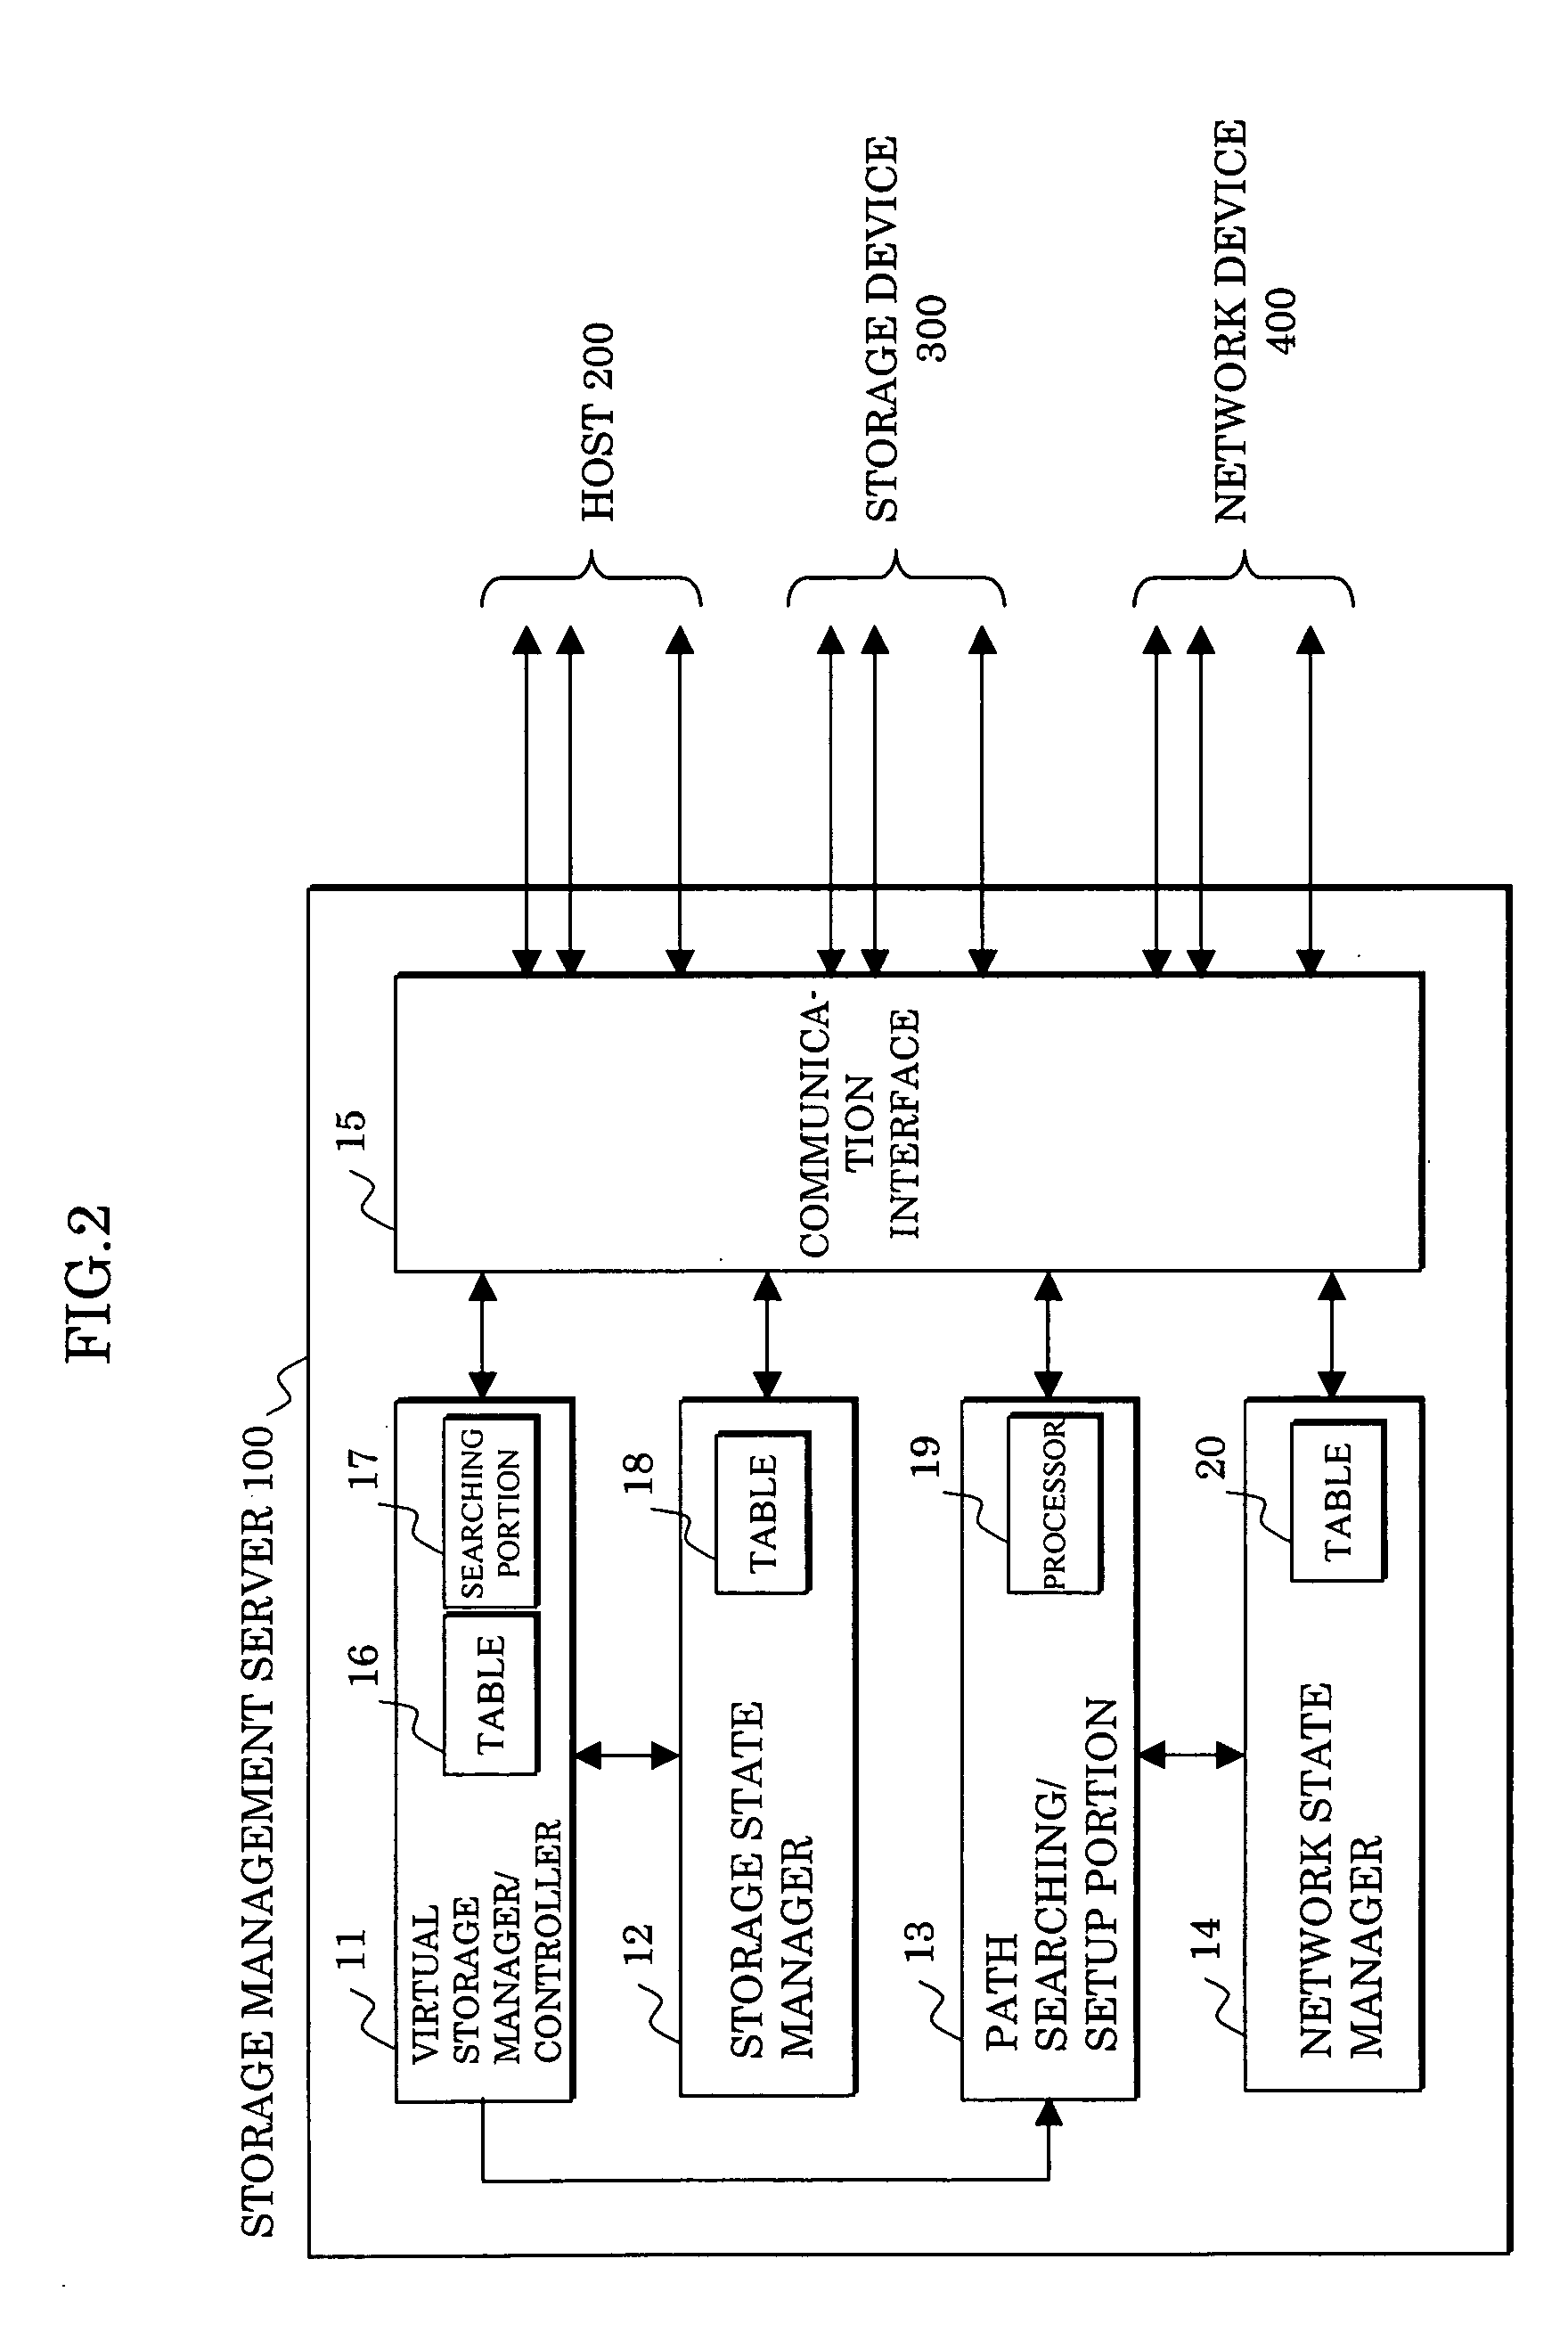 Storage management system and method